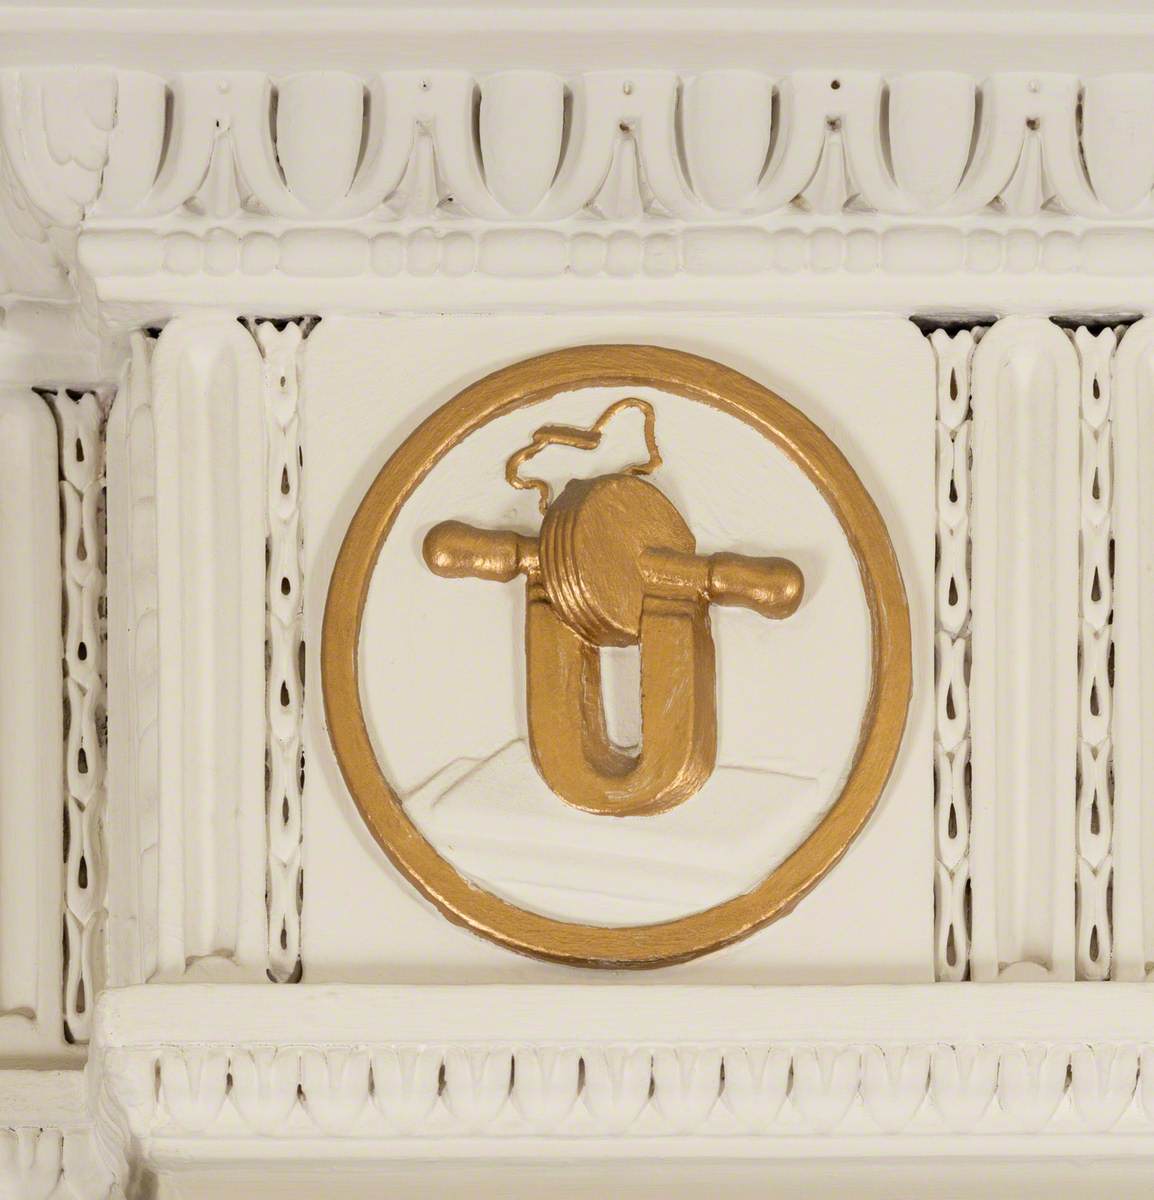 Plaster Roundel Depicting Faraday's Electric Spark Apparatus